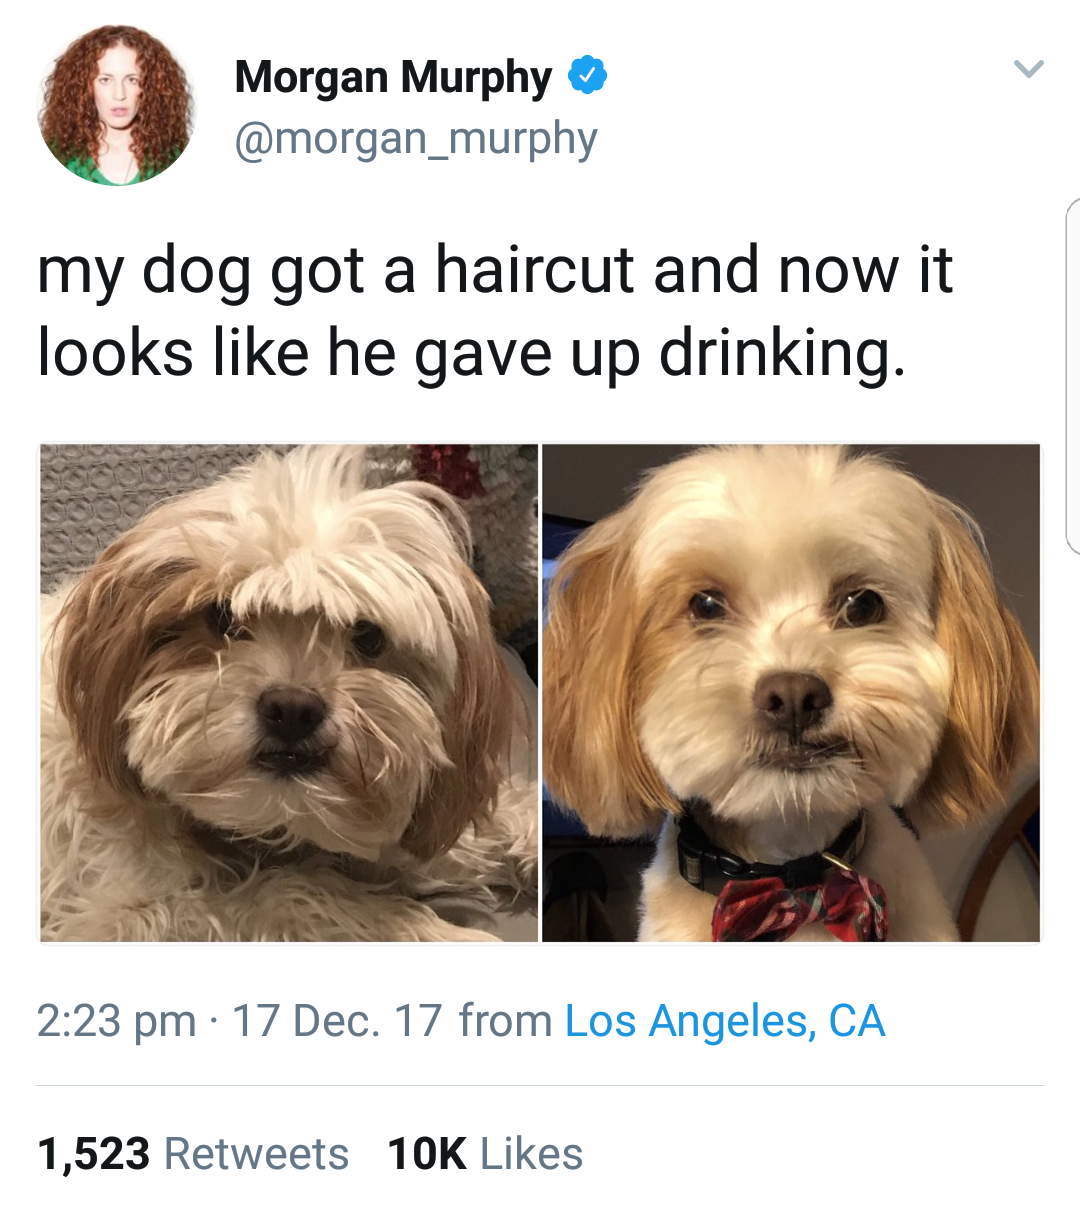 looking like a snack - Morgan Murphy my dog got a haircut and now it looks he gave up drinking. 17 Dec. 17 from Los Angeles, Ca 1,523 10K